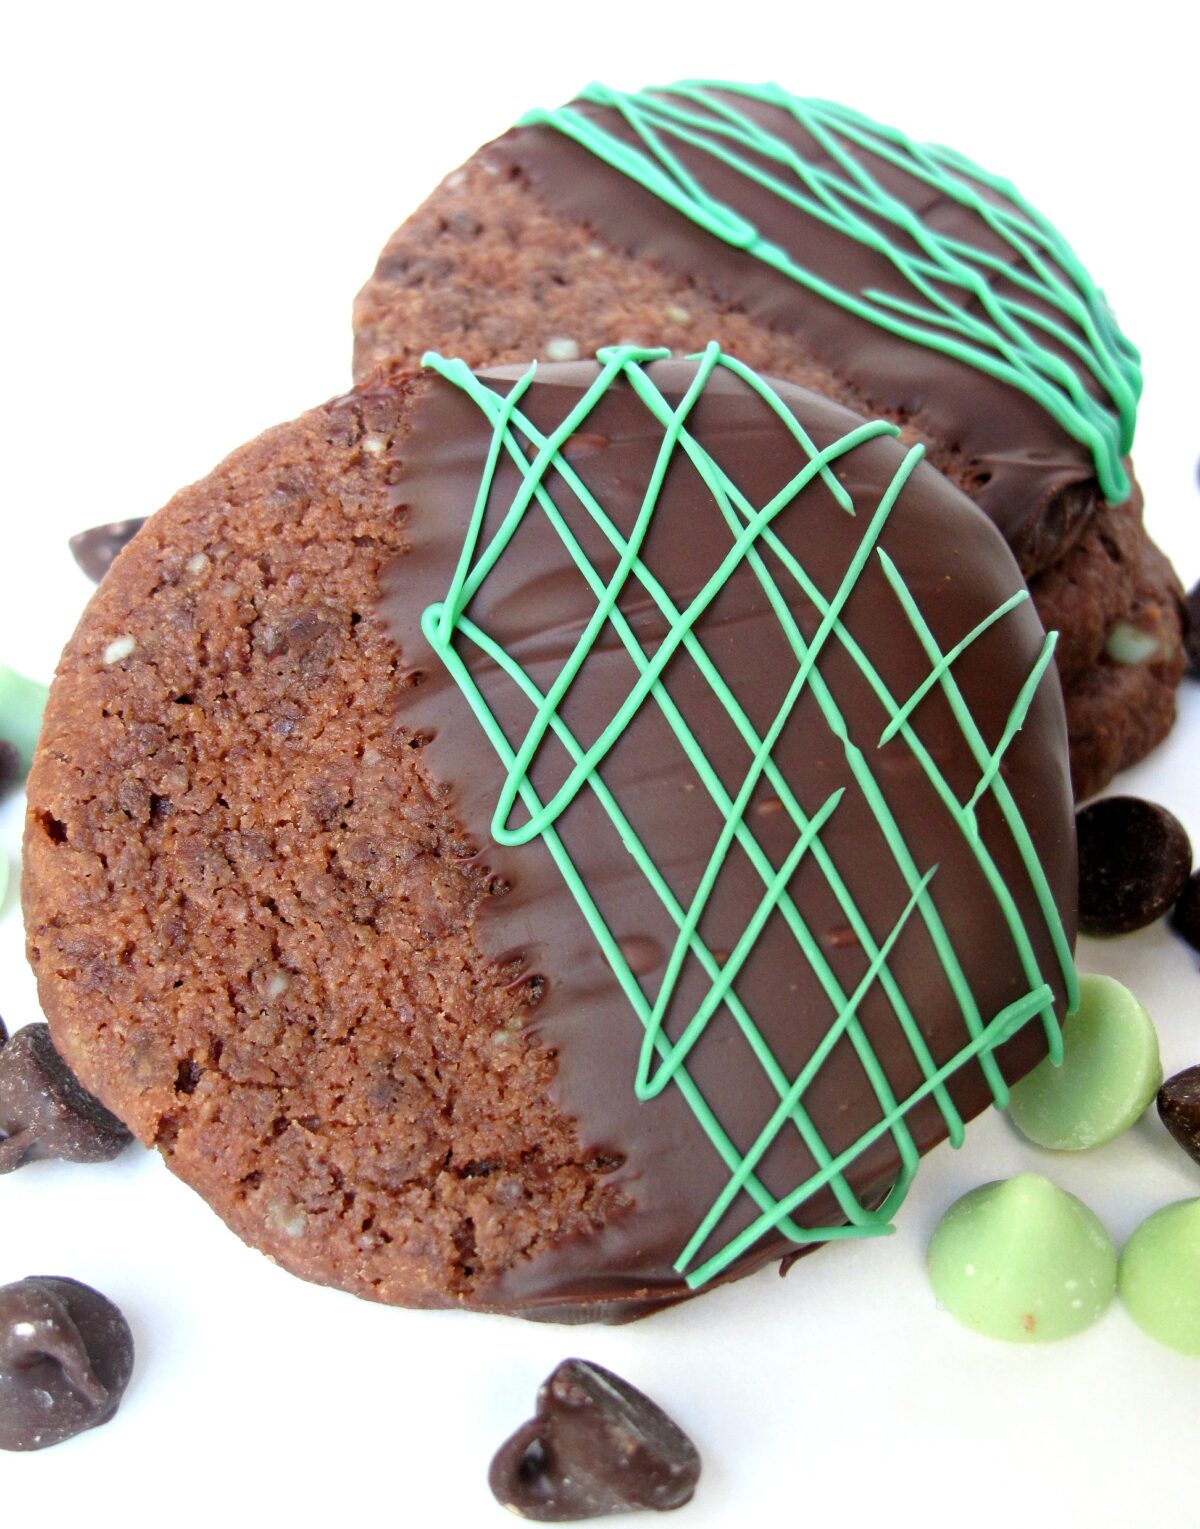 Closeup of a chocolate cookie dipped in chocolate with melted green mint chocolate drizzle.